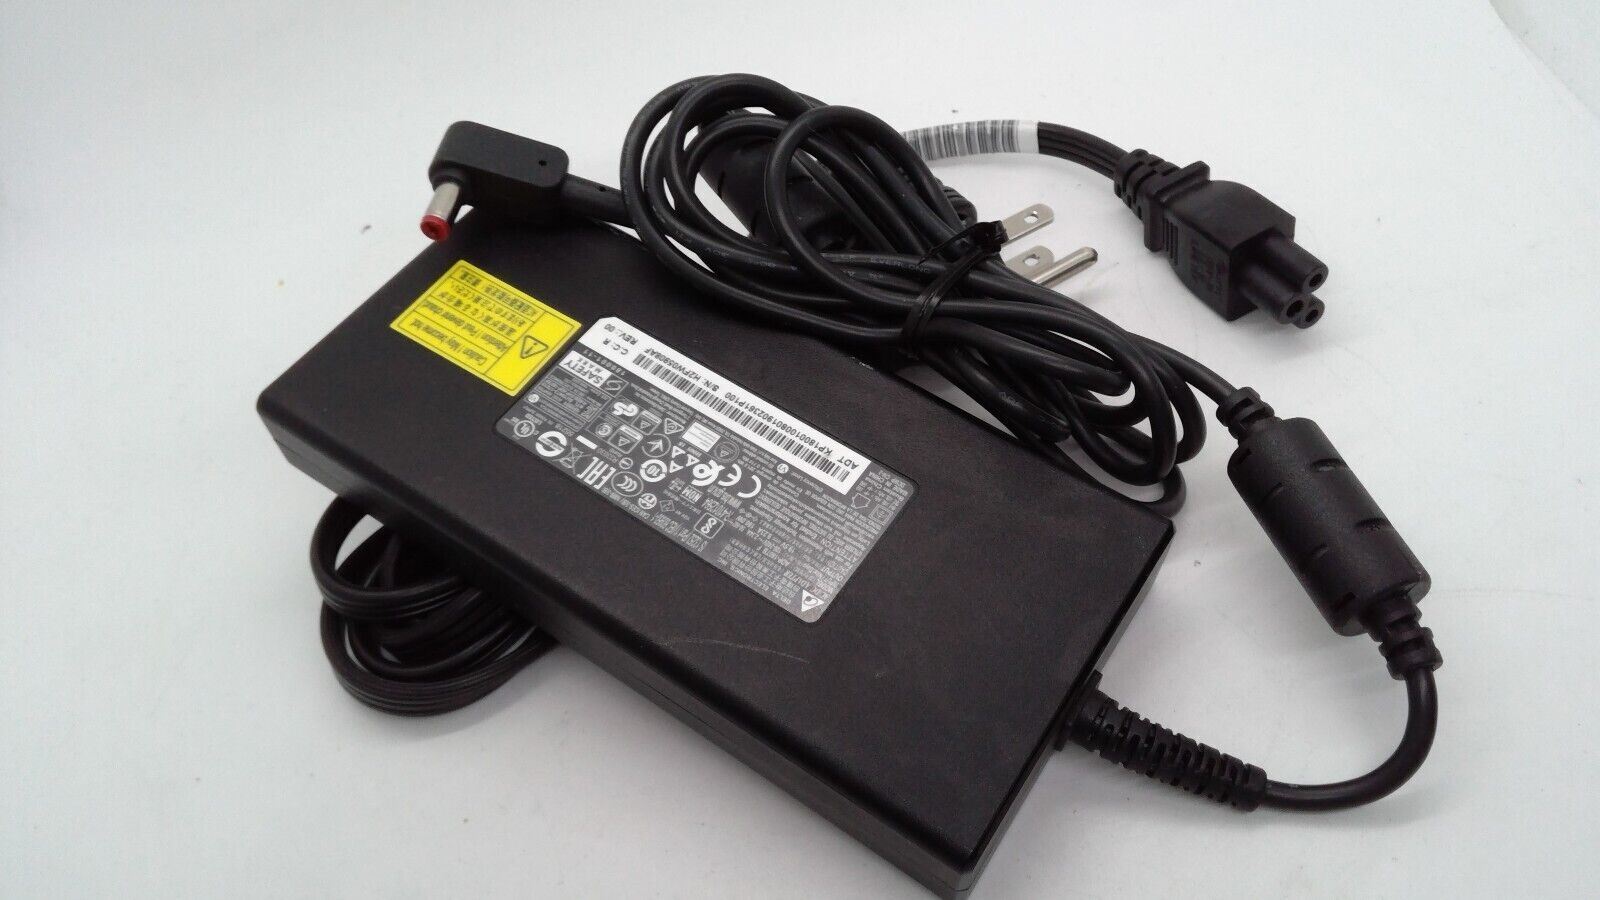 Genuine Delta MSI ADP-180TB F 19.5V 9.23A 180W Power Adapter Charger Red Tip 5.5